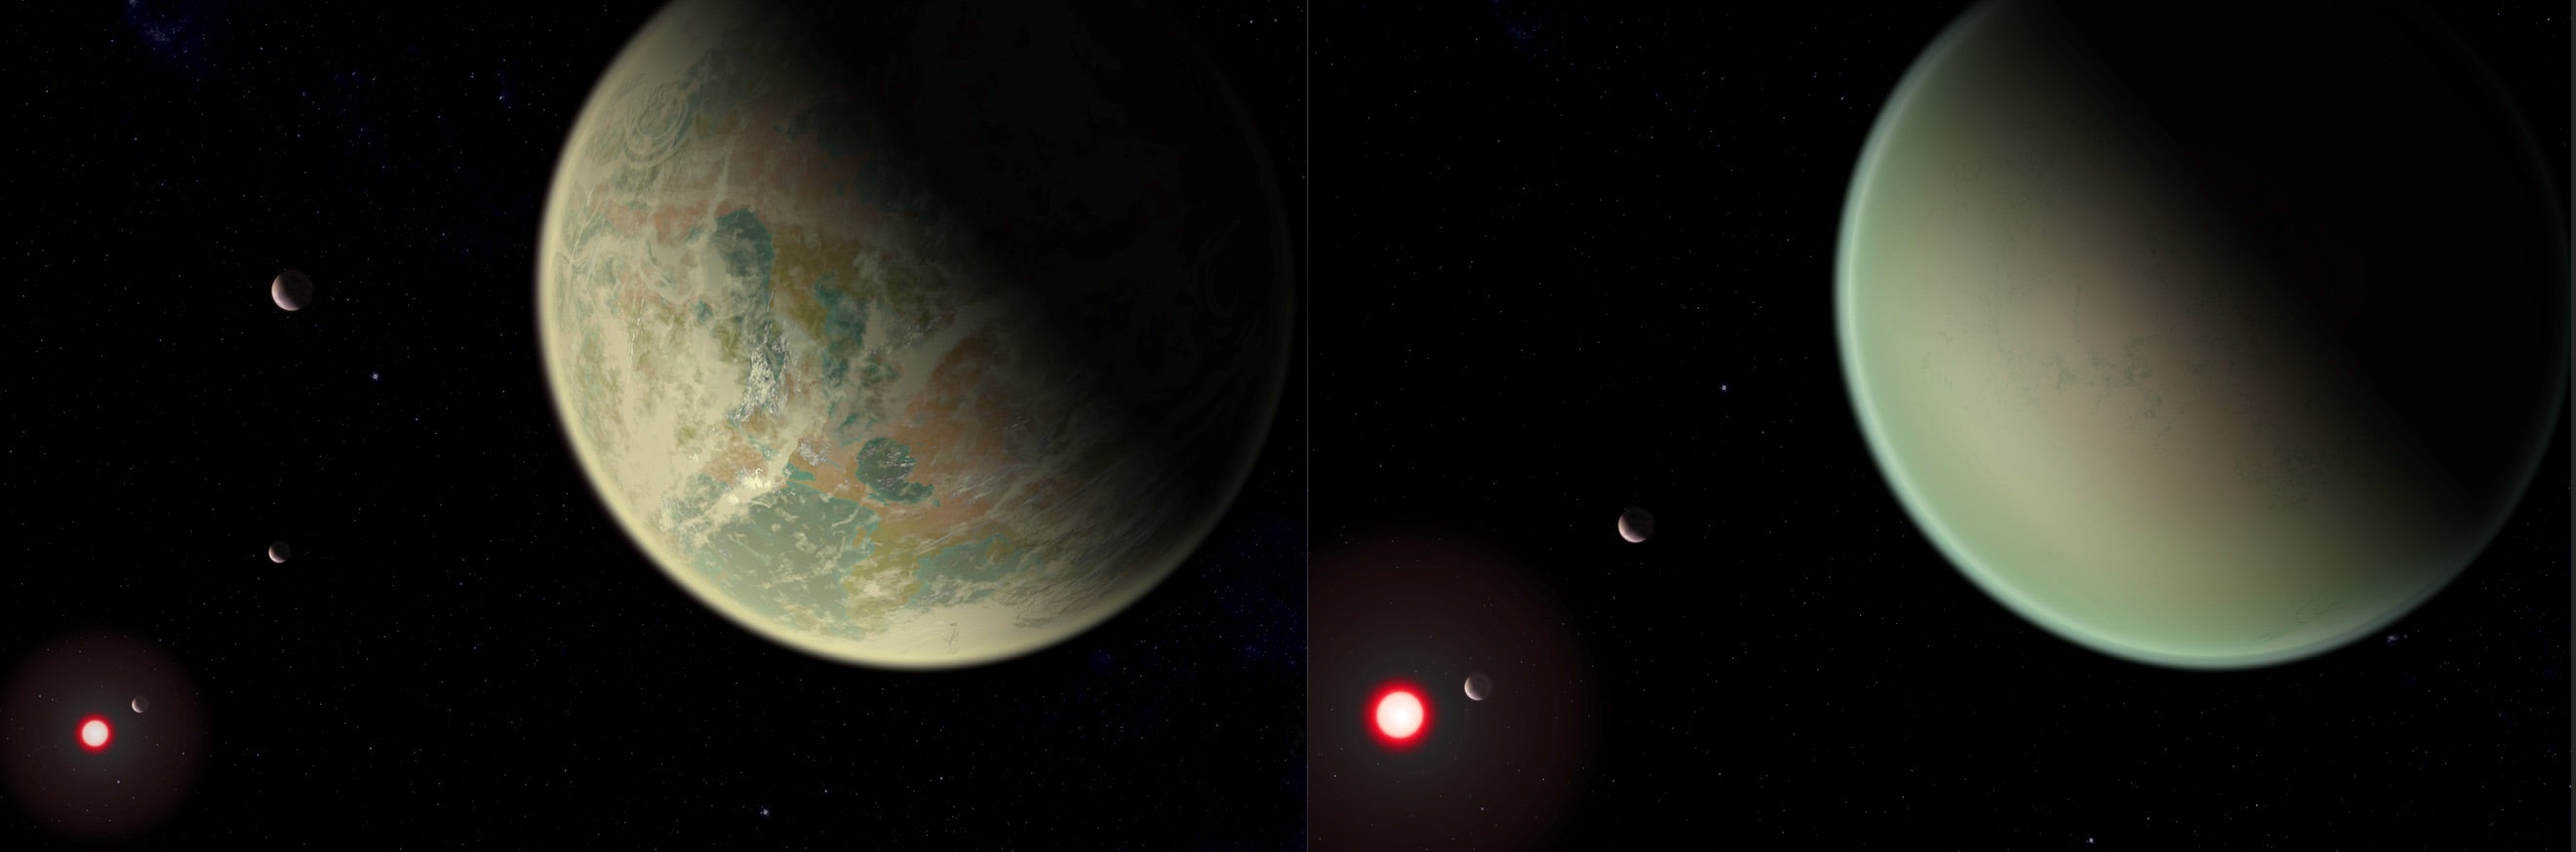 Scientists develop new method to detect oxygen on exoplanets - UC Riverside